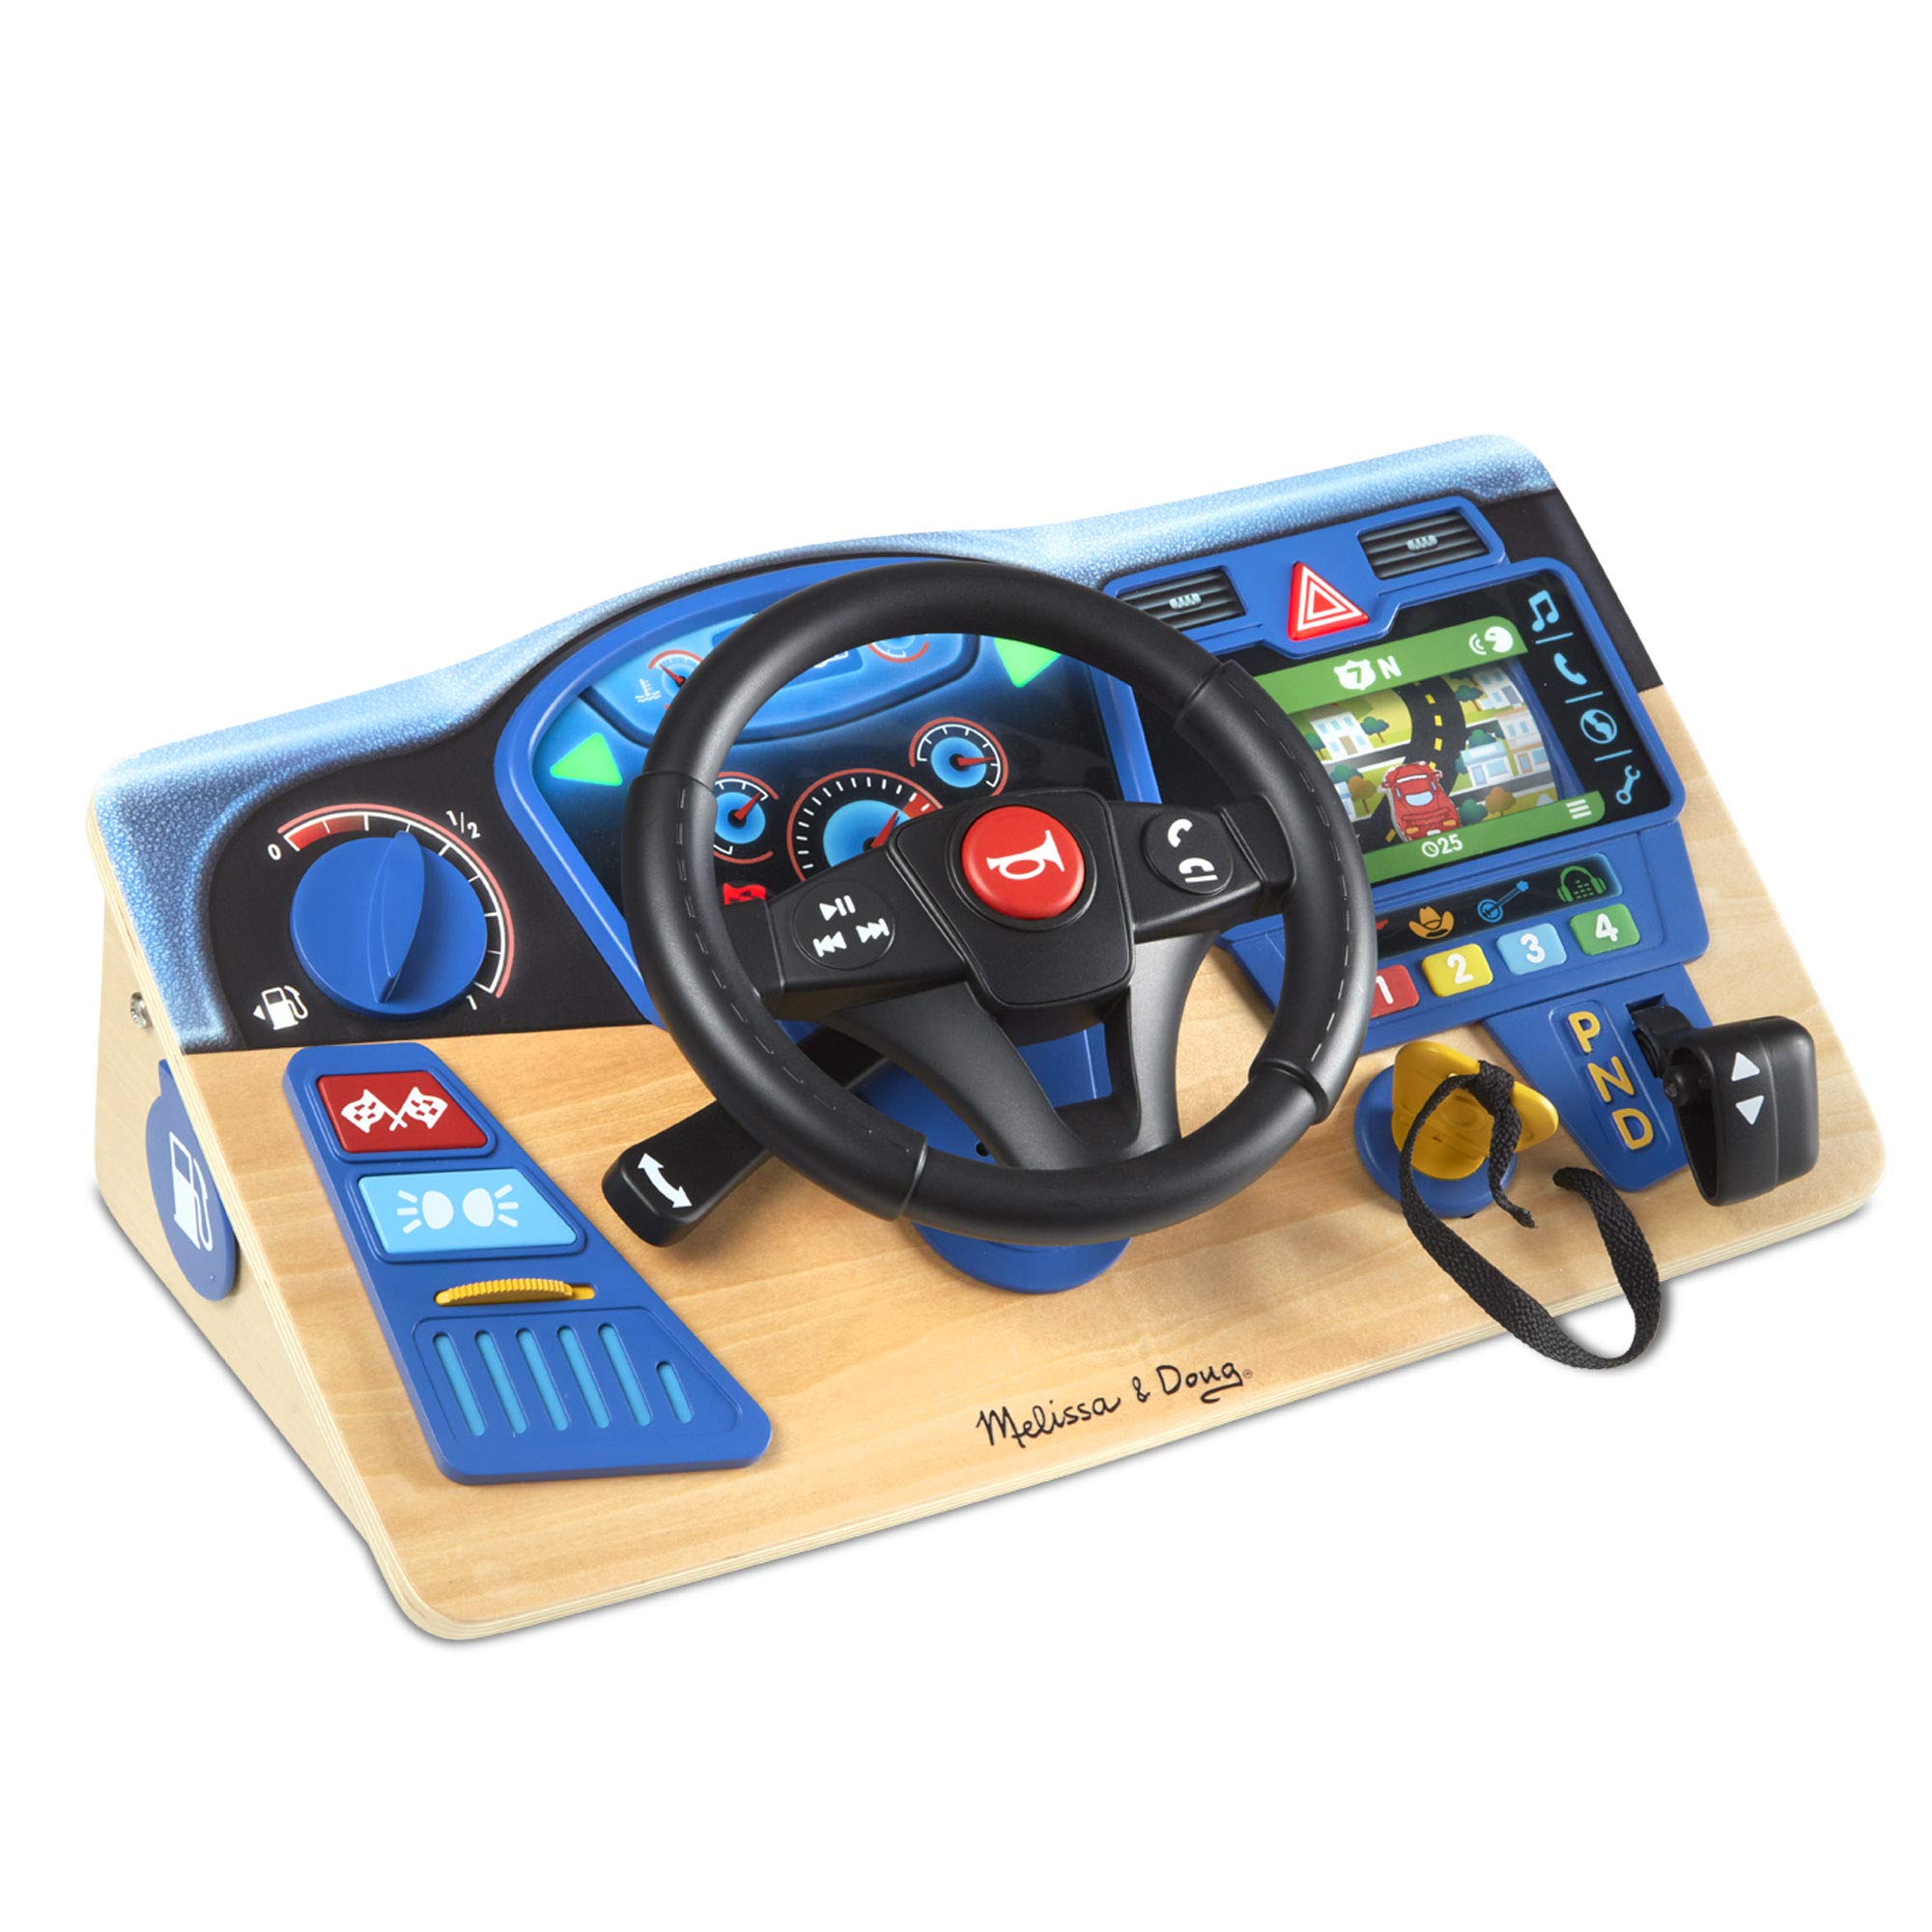 Melissa Doug Vroom Zoom Interactive Wooden Dashboard Steering Wheel Pretend Play Driving Toy - Kids Activity Board Toddl